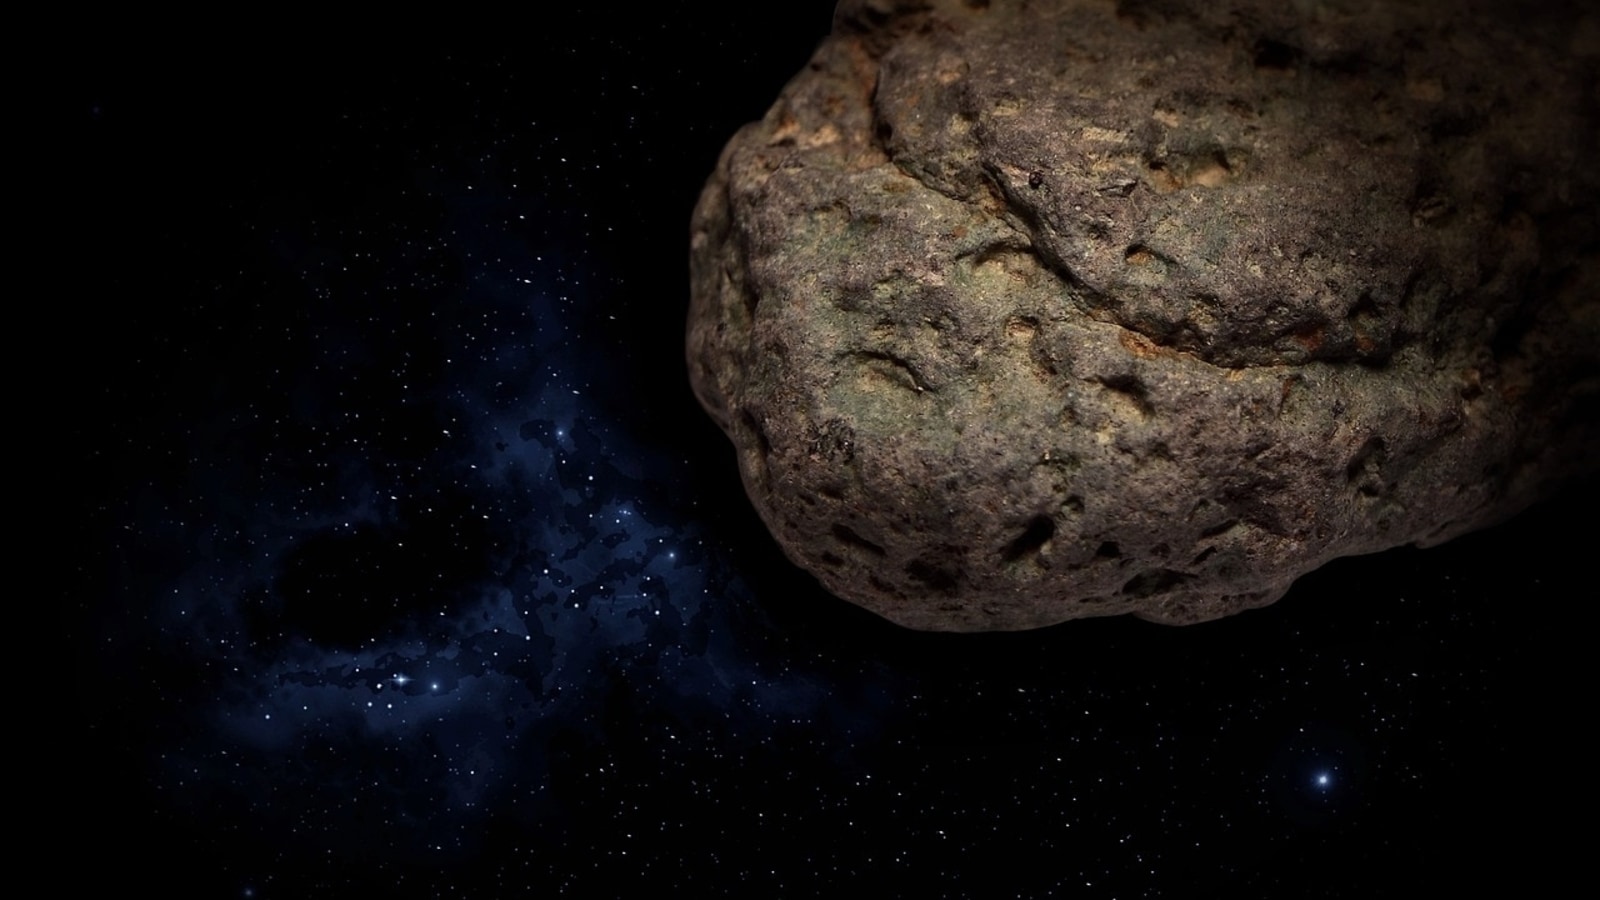 Asteroid flyby today! Plane-sized home rock will transfer Earth carefully, reveals NASA